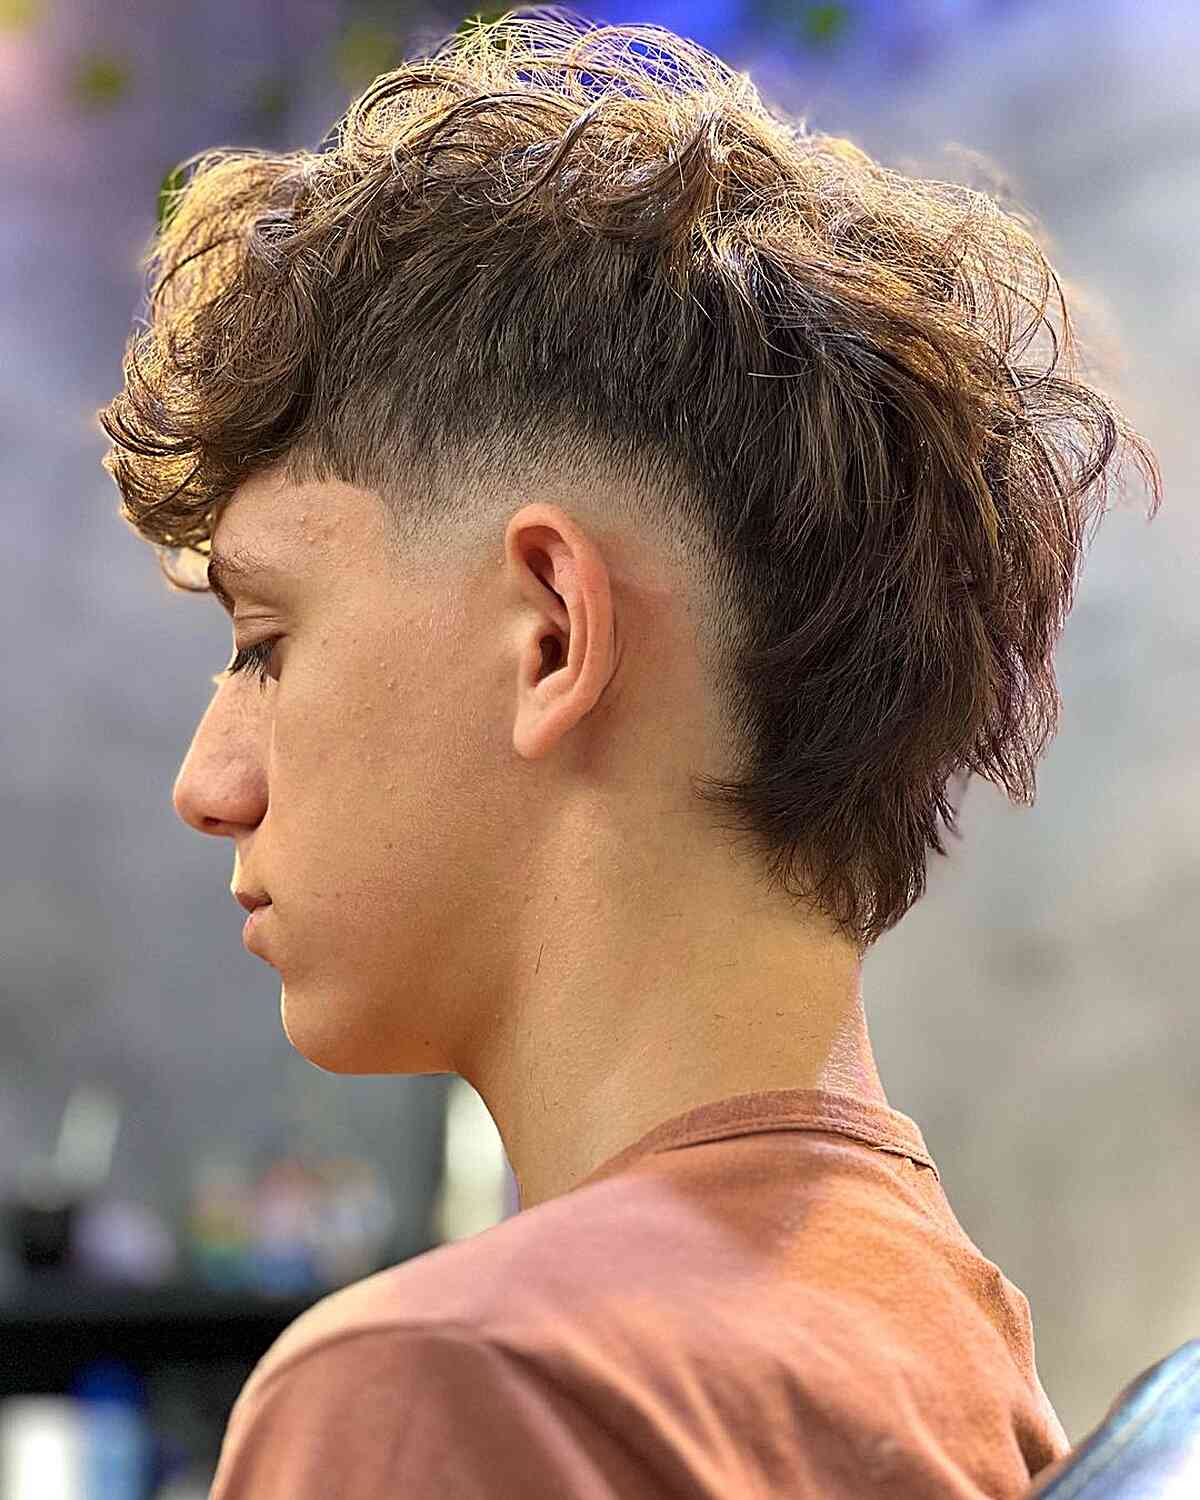 Mohawk Style for Teen Boys with an edgy side